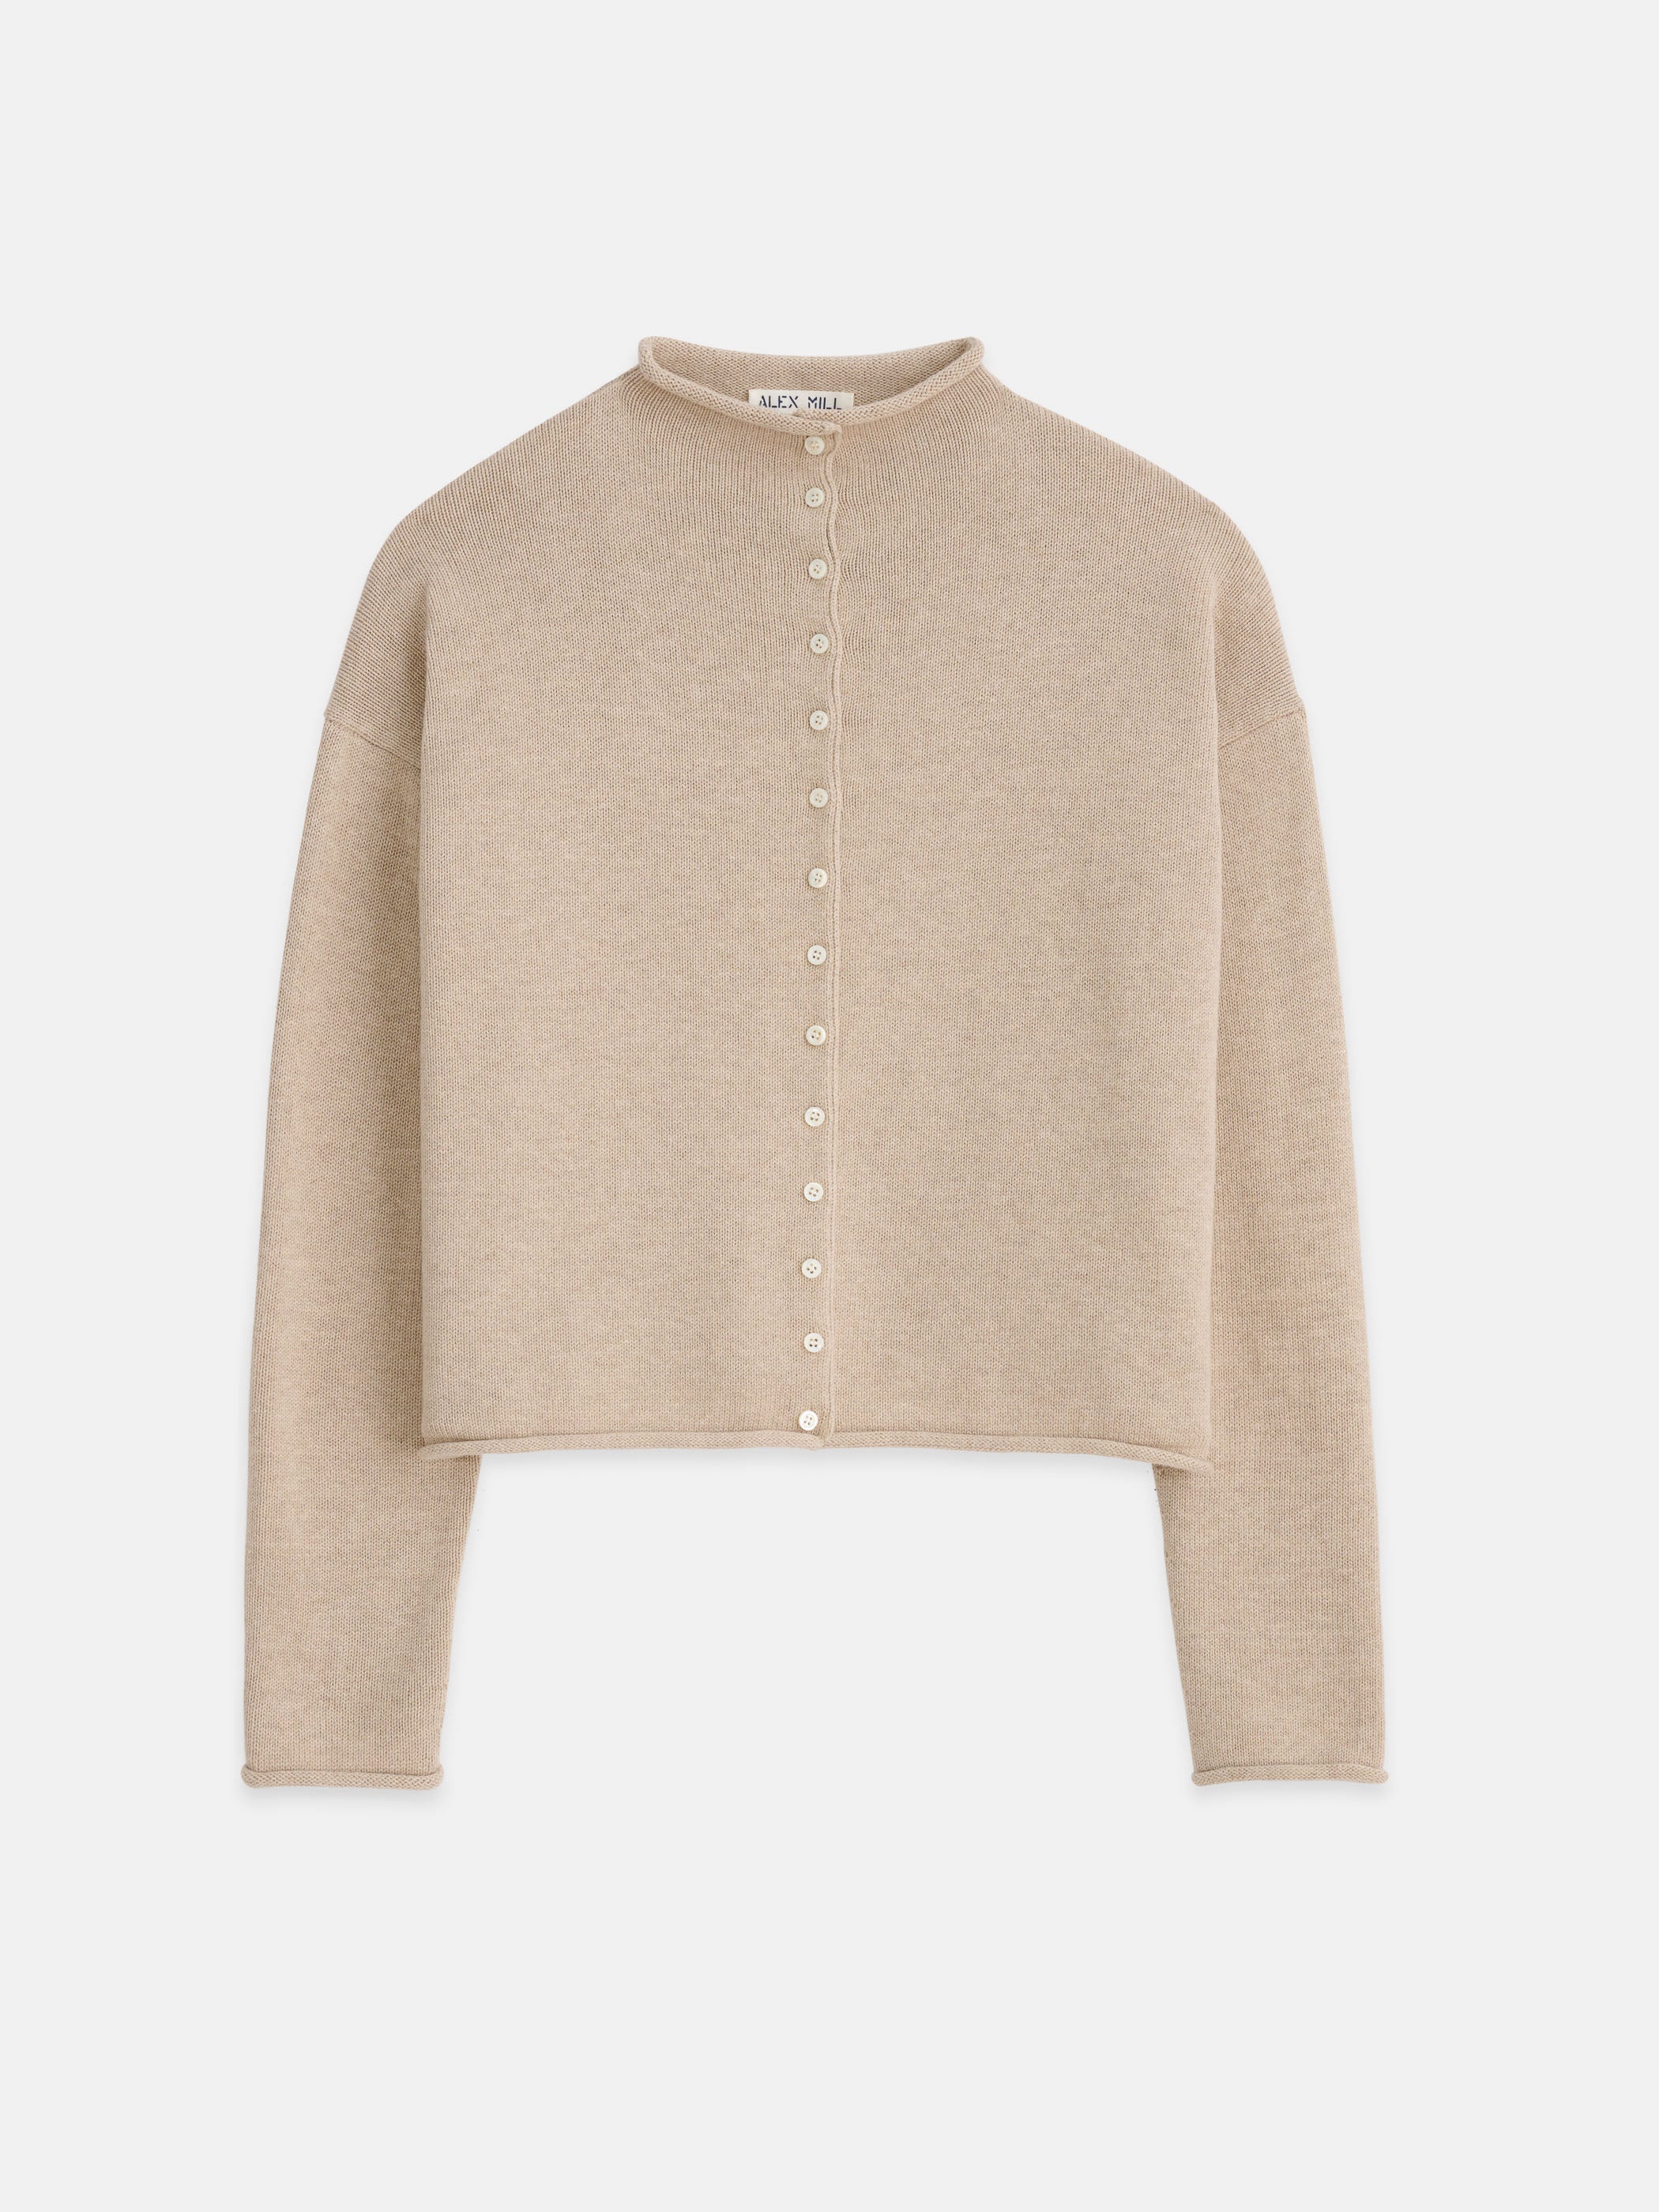 Alex Mill Taylor Rollneck Cardigan In Cotton Cashmere In Vellum